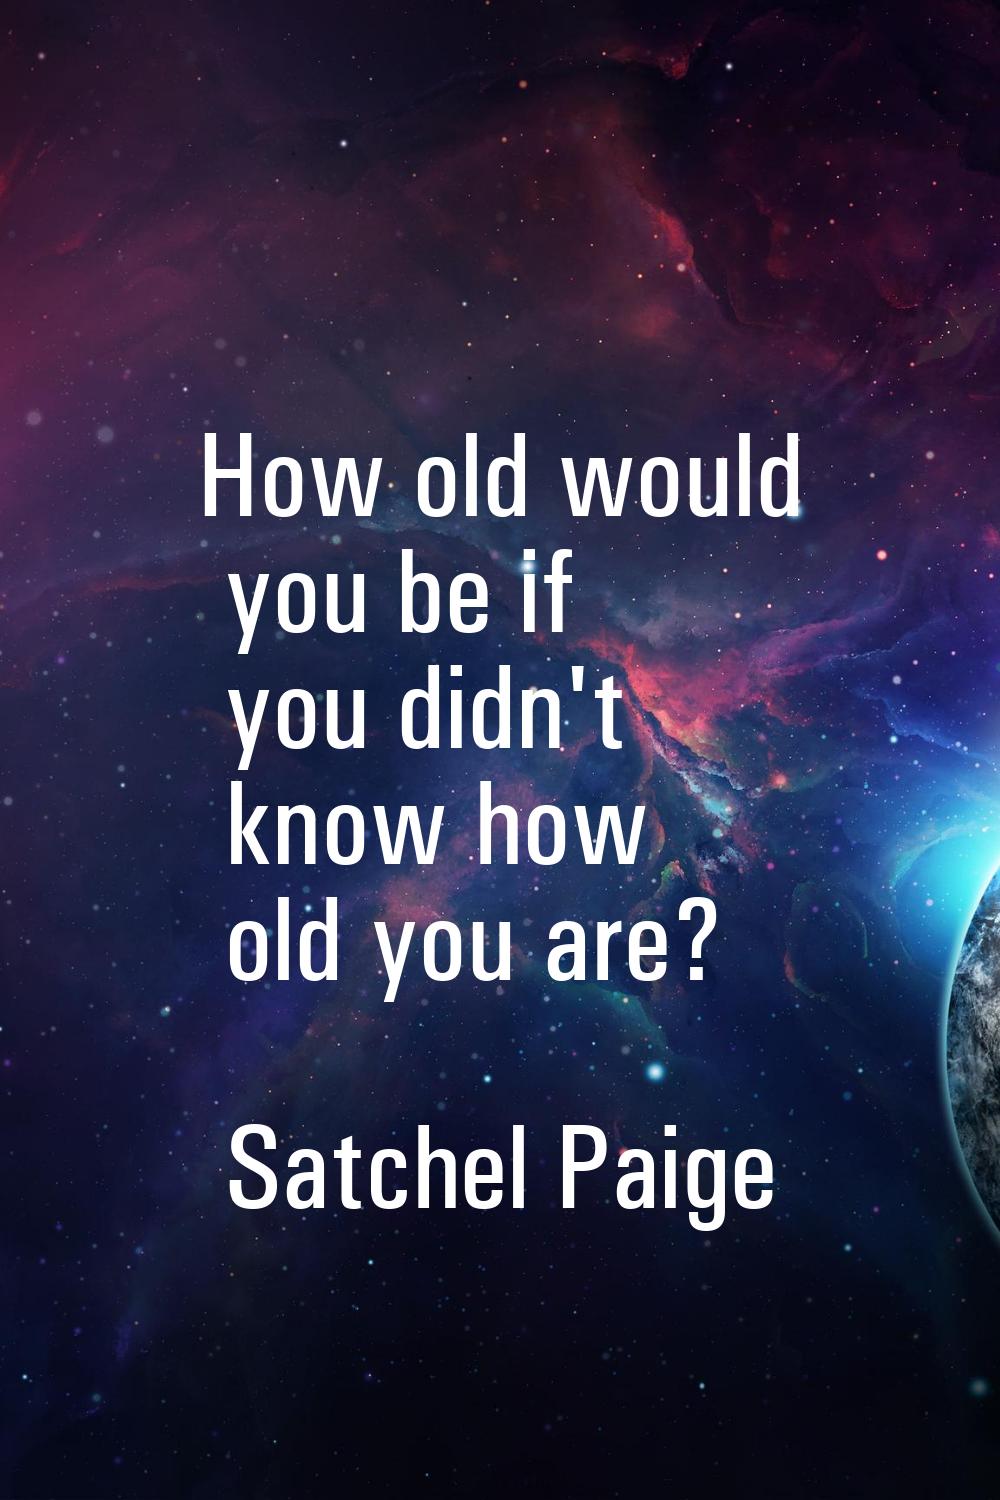 How old would you be if you didn't know how old you are?